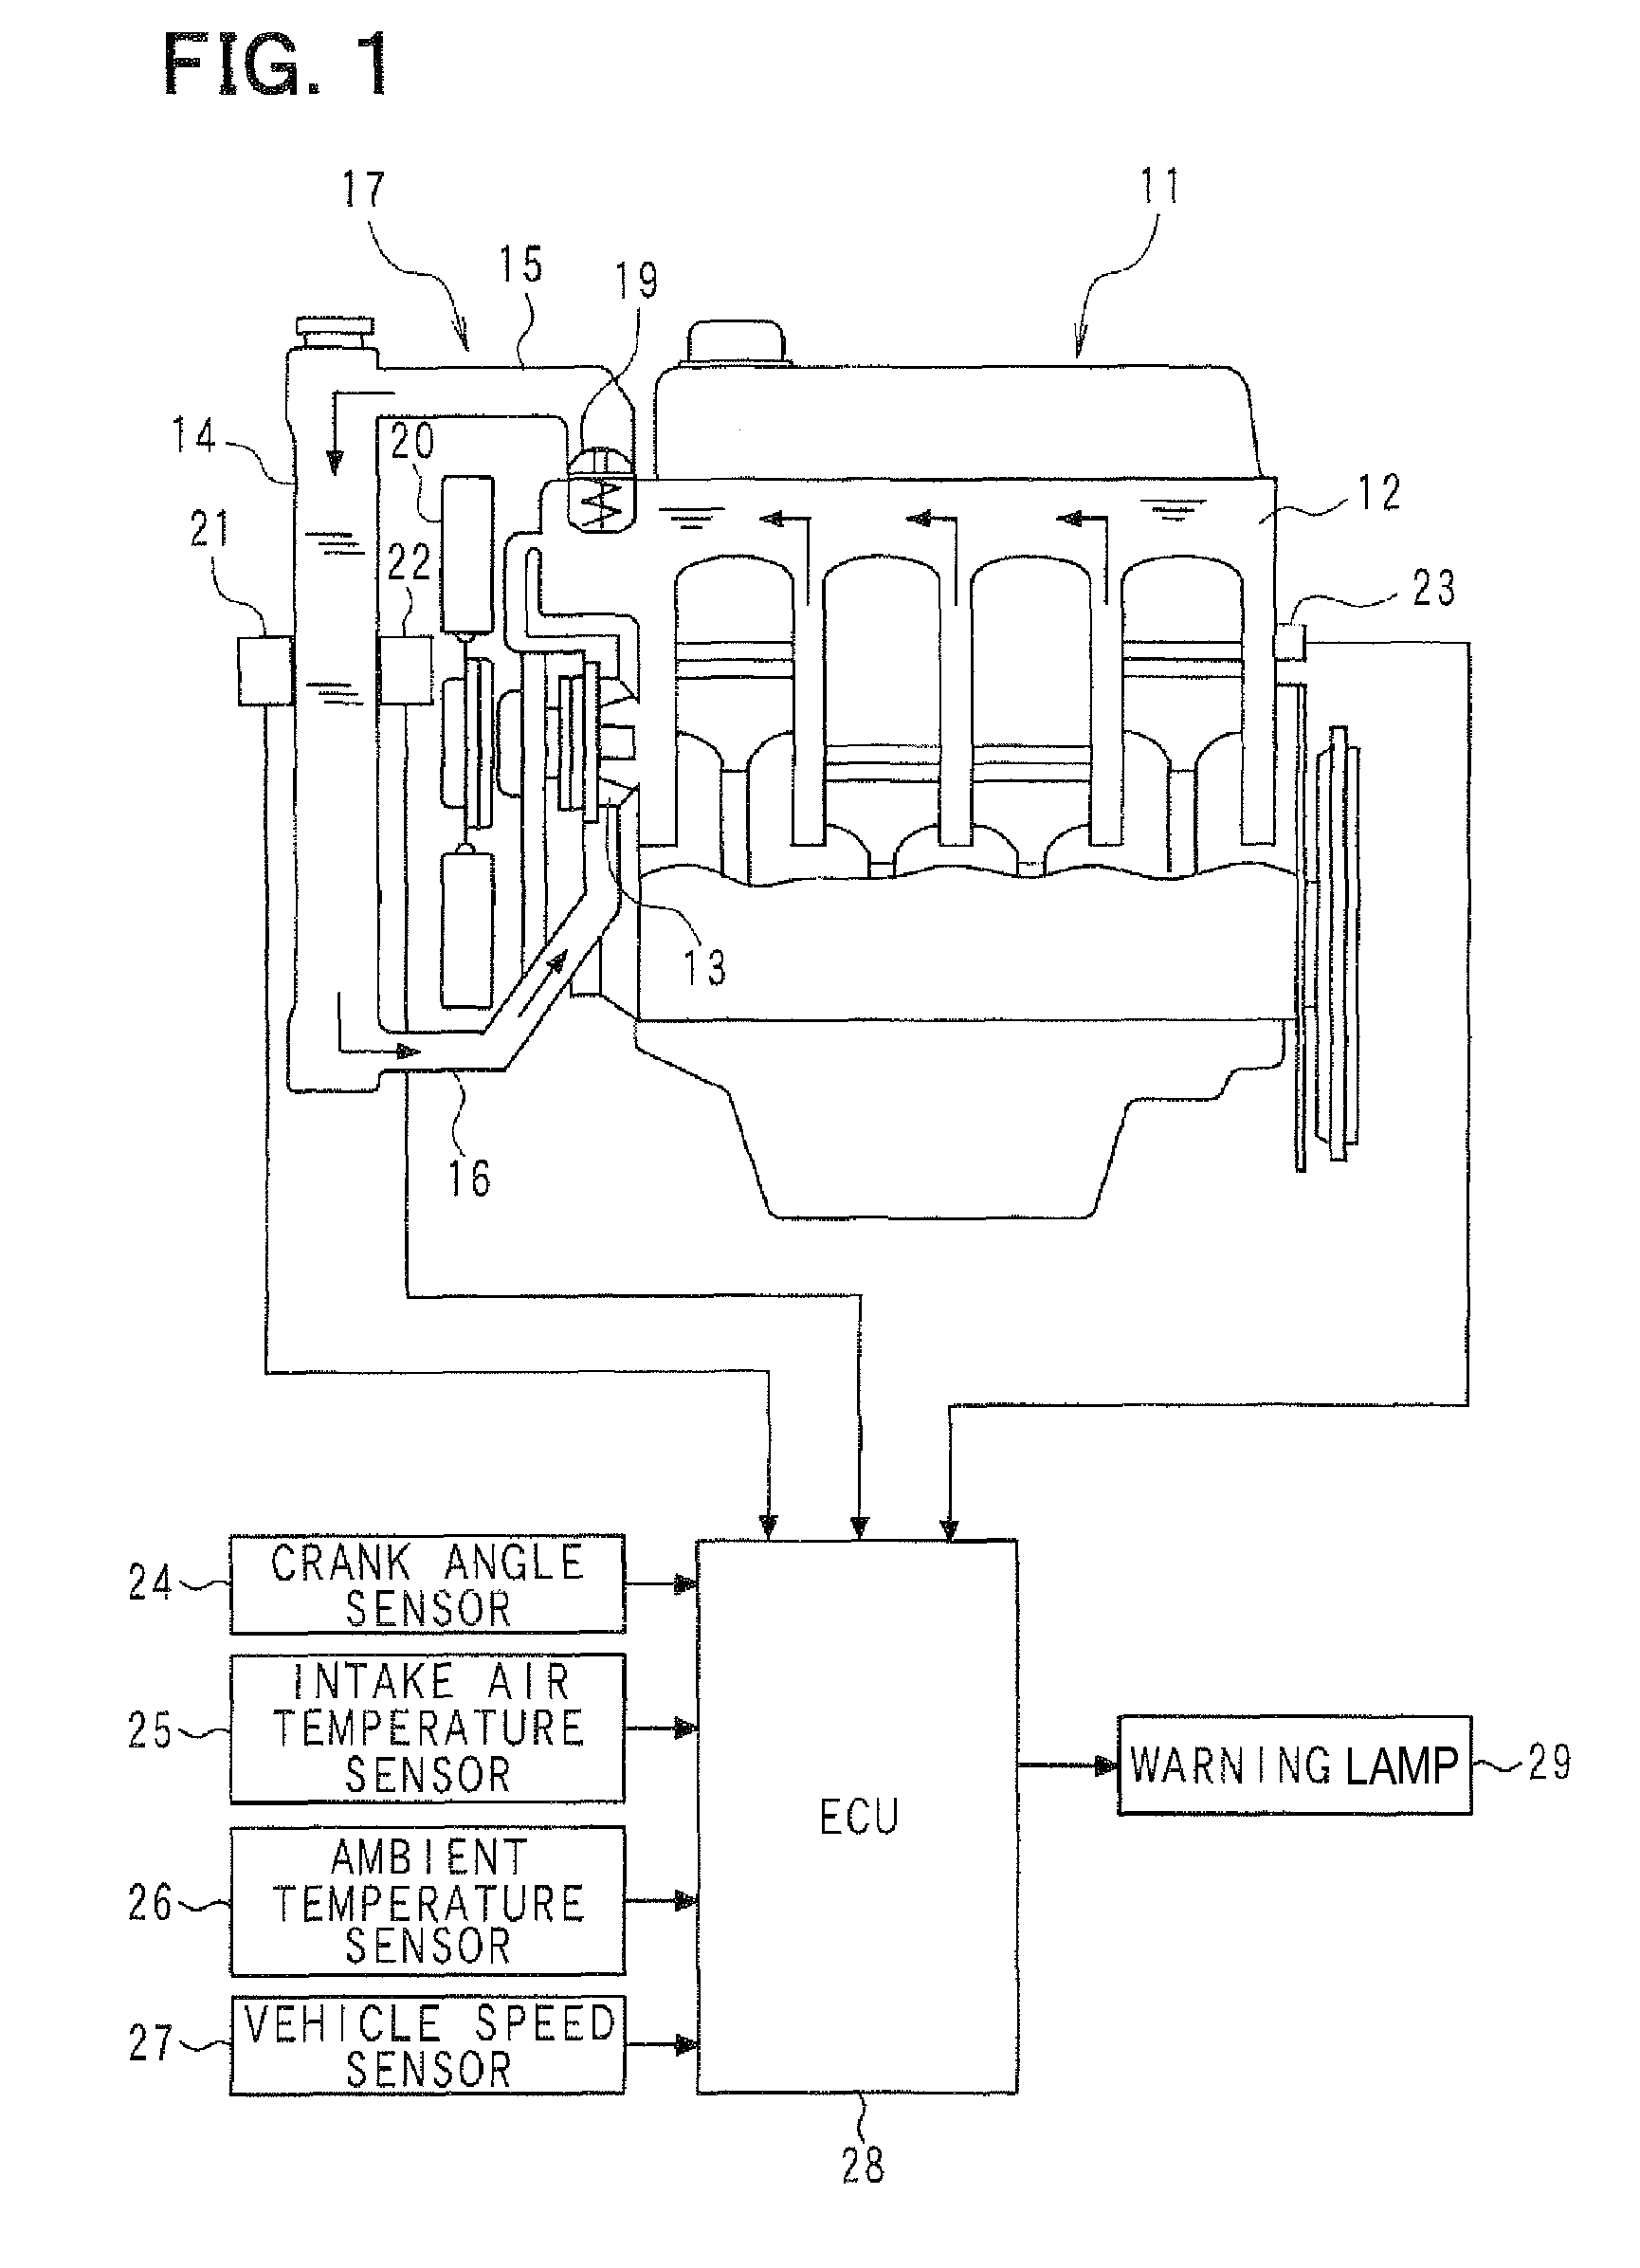 Diagnostic apparatus for vehicle cooling system